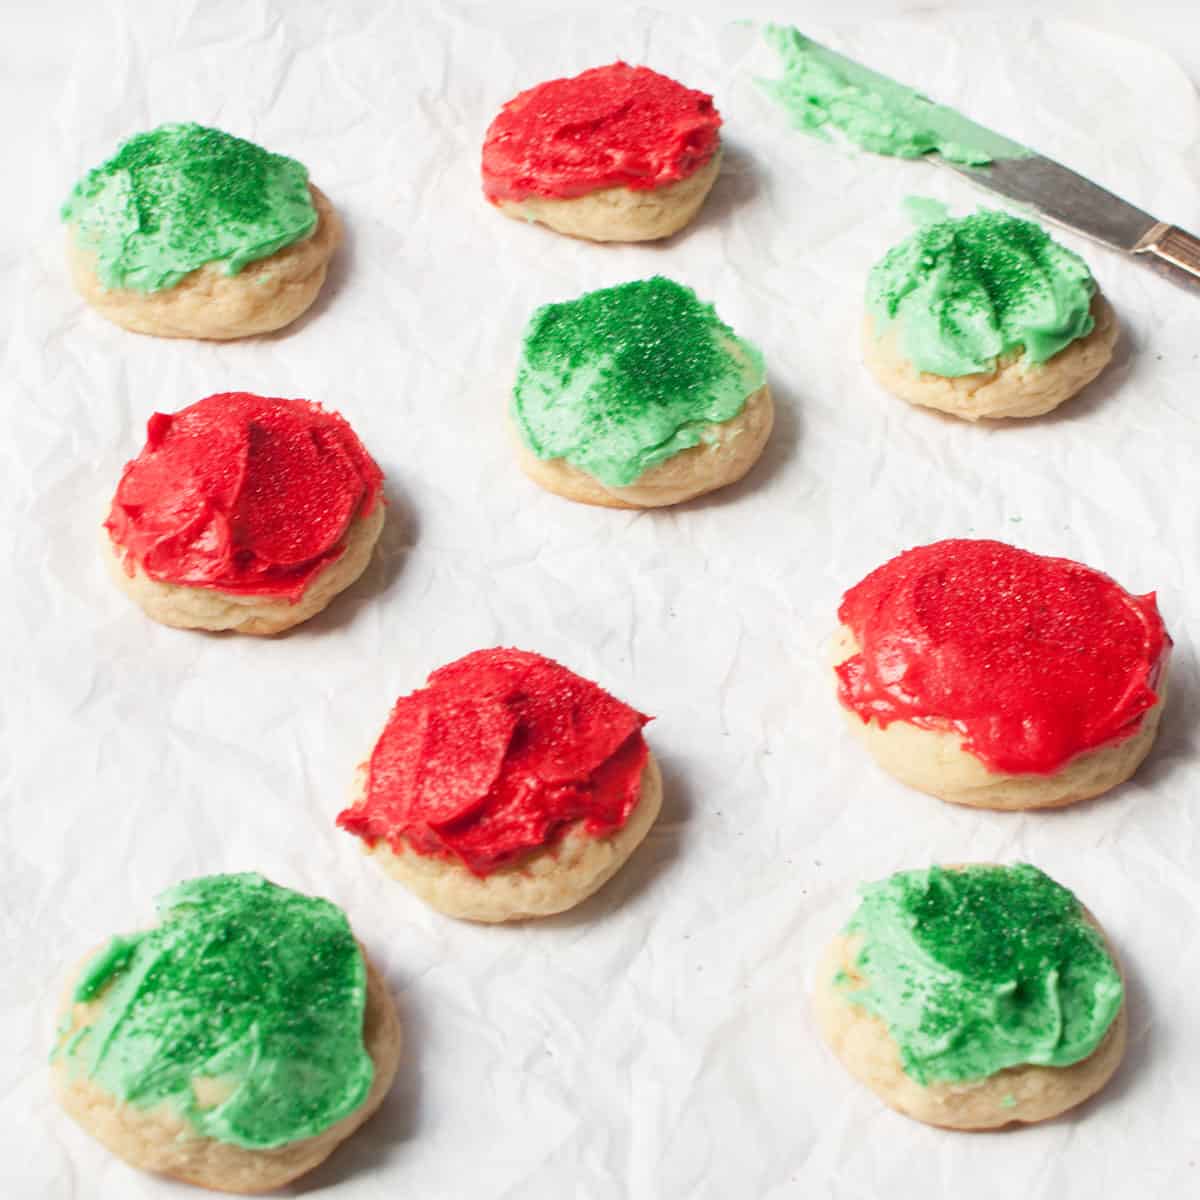 Amish Christmas cookies with green or red frosting and sprinkles on a white backbground. There is a knife with frosting on it in the background.